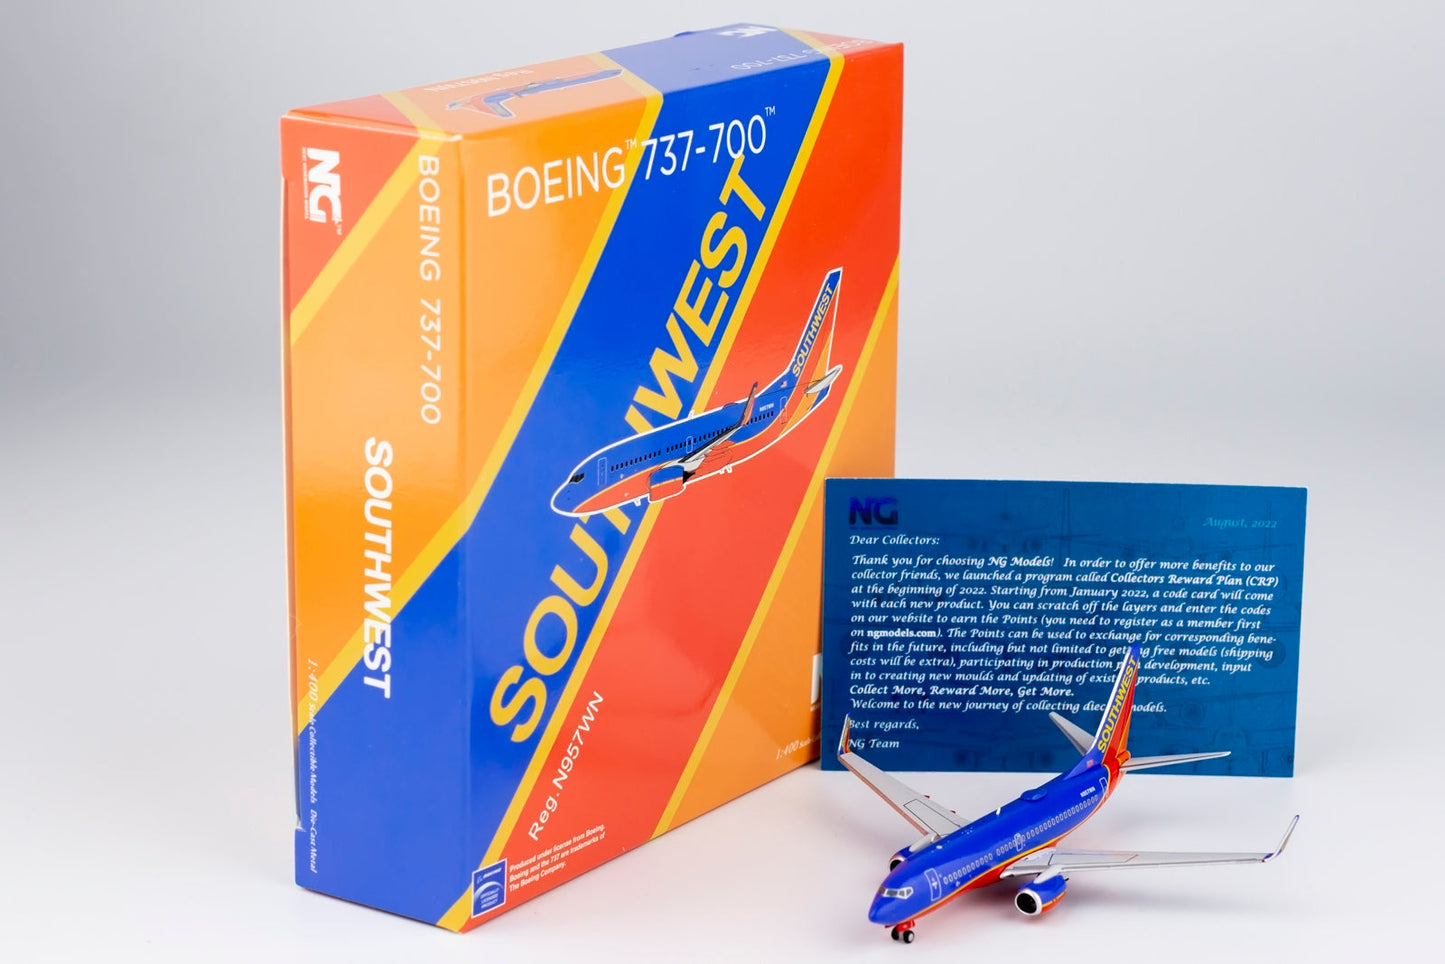 Backorder 1/400 Southwest Airlines B 737-700 NG Models 77023 (Canyon Blue Livery)